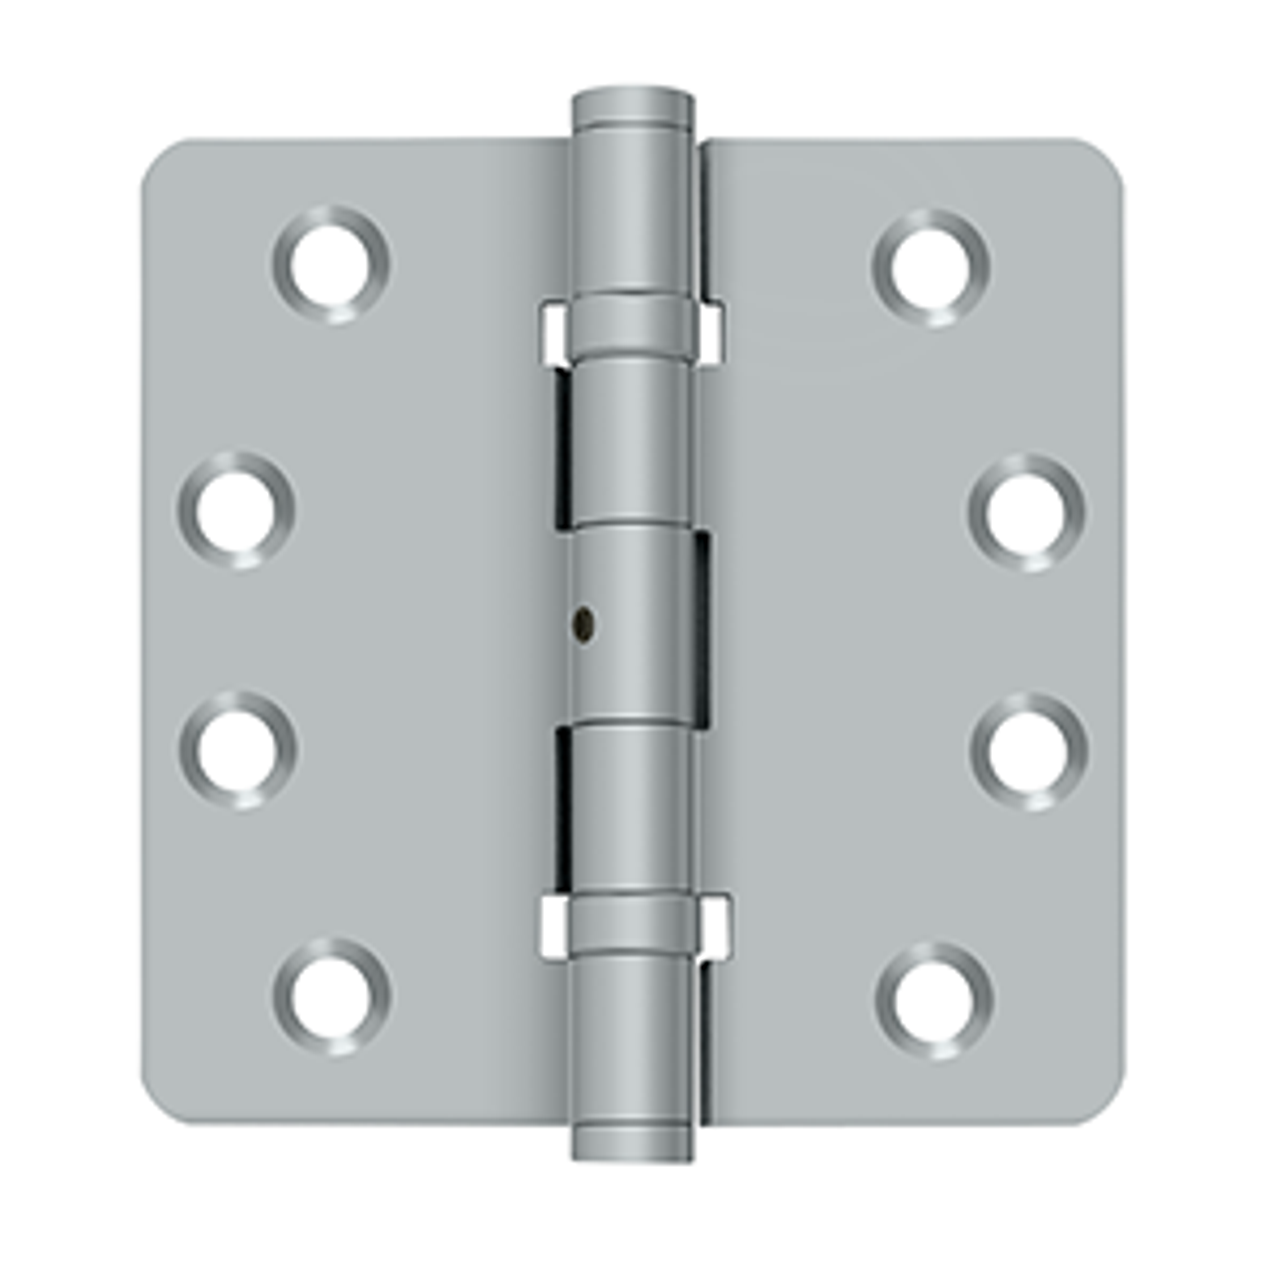 Deltana DSB4R4NB SERIES 4" X 4" X 1/4" RADIUS HINGES, BALL BEARINGS, NON-REMOVEABLE-PIN, SOLID BRASS